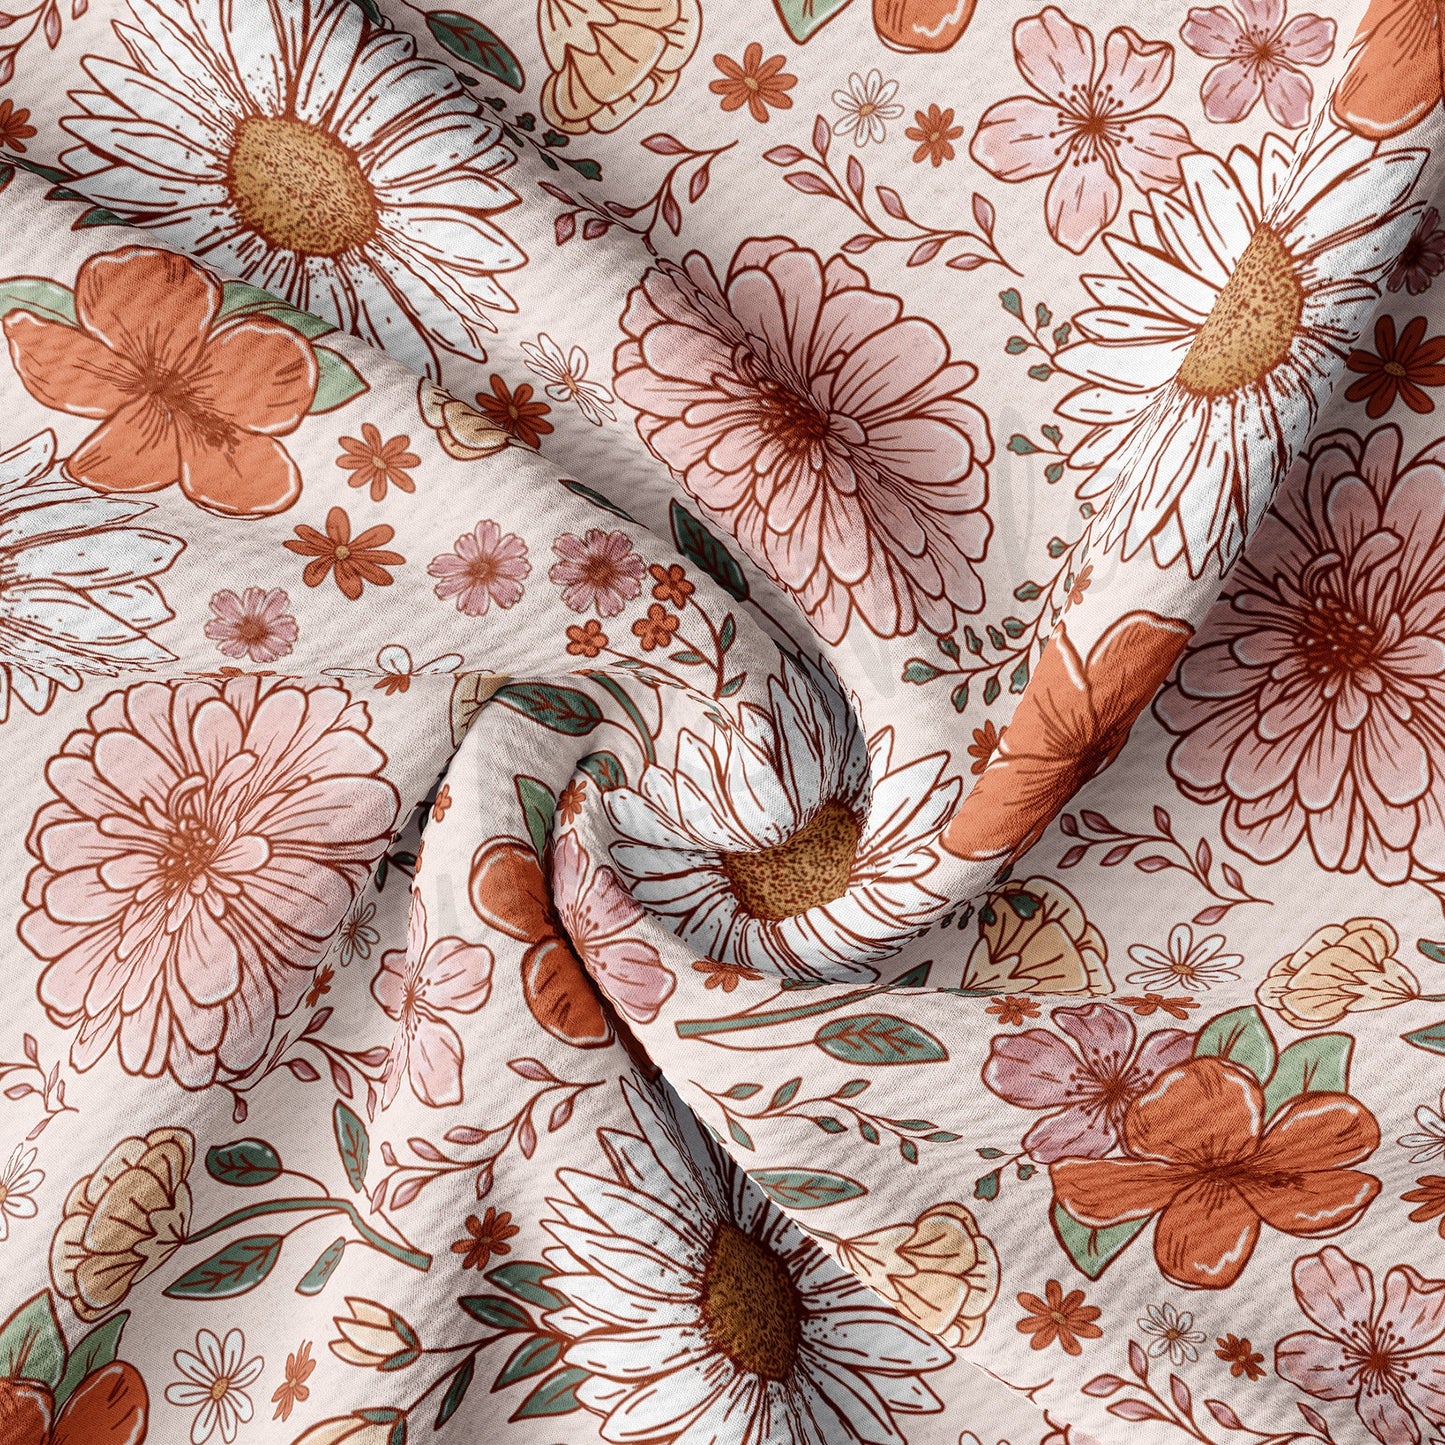 Floral  Bullet Textured Fabric by the yard AA1575